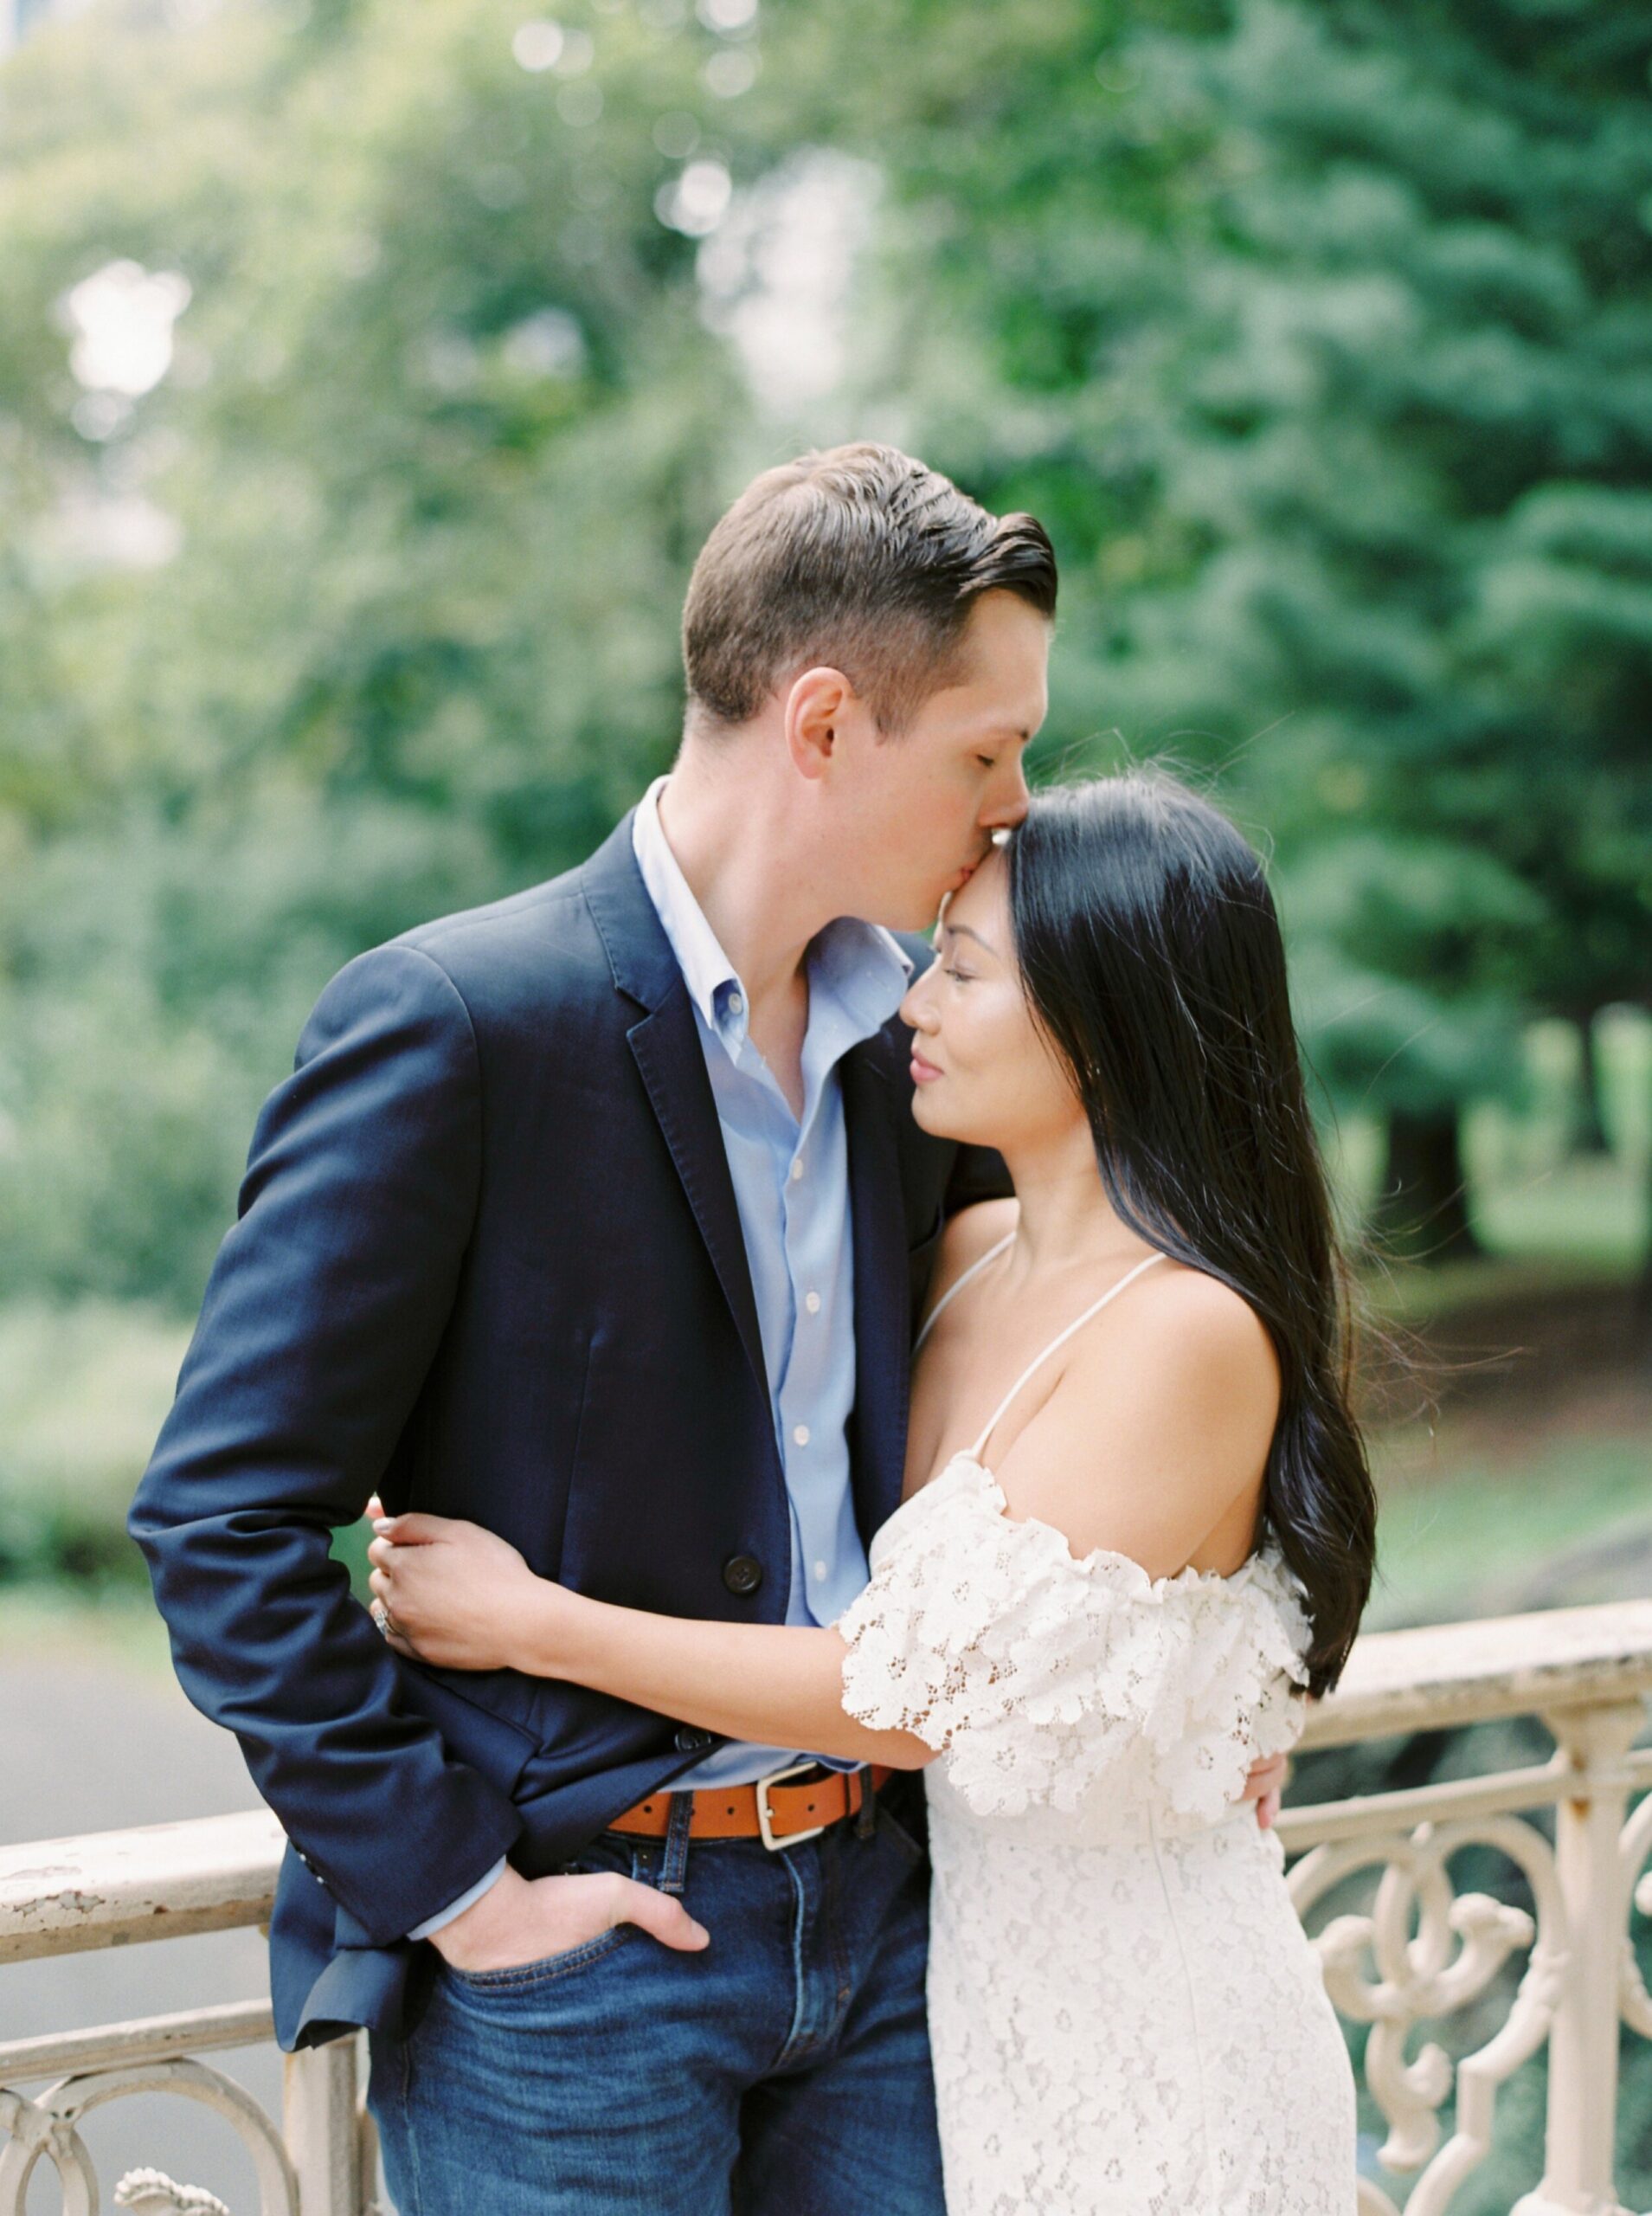  NYC central park engagement photographer | Justine Milton finr at film photography 